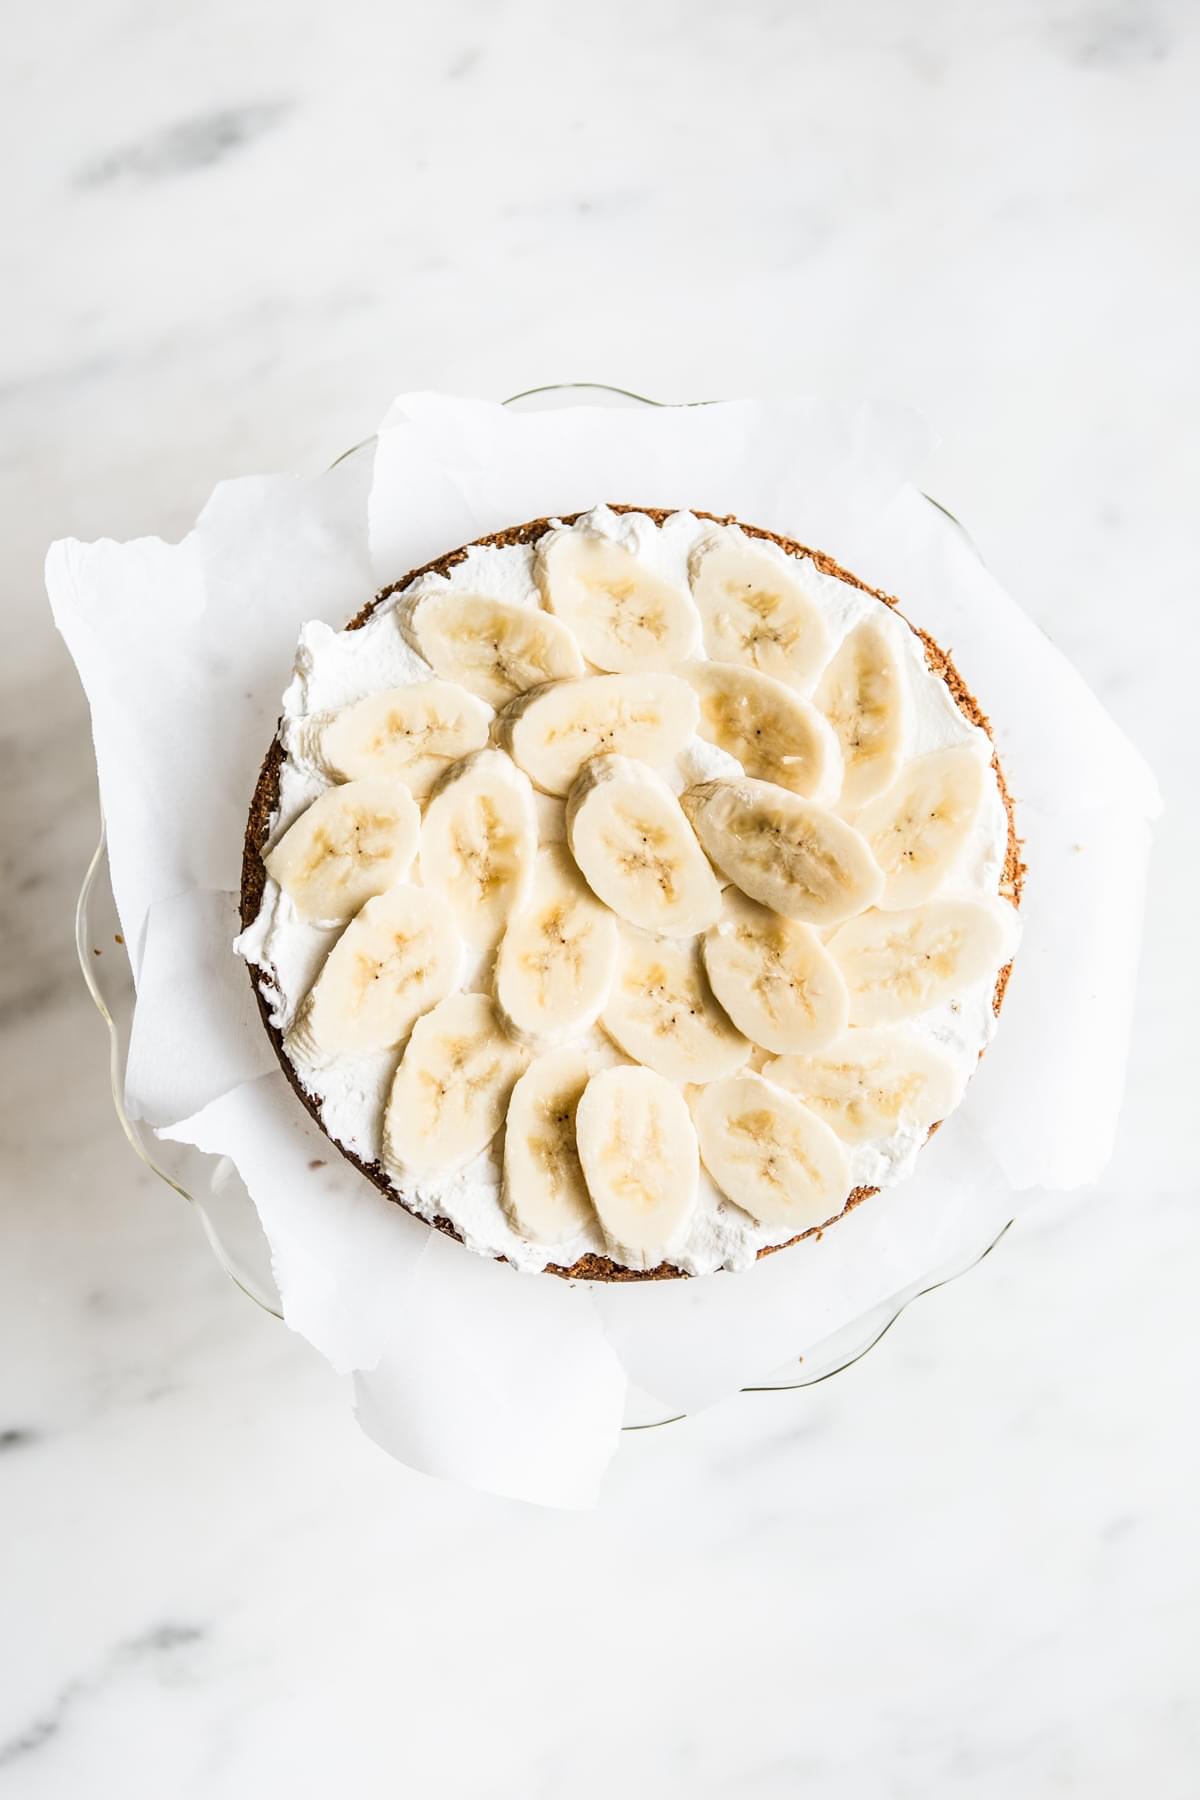 whipped frosting cream and banana slices on top of a layer of banana cake